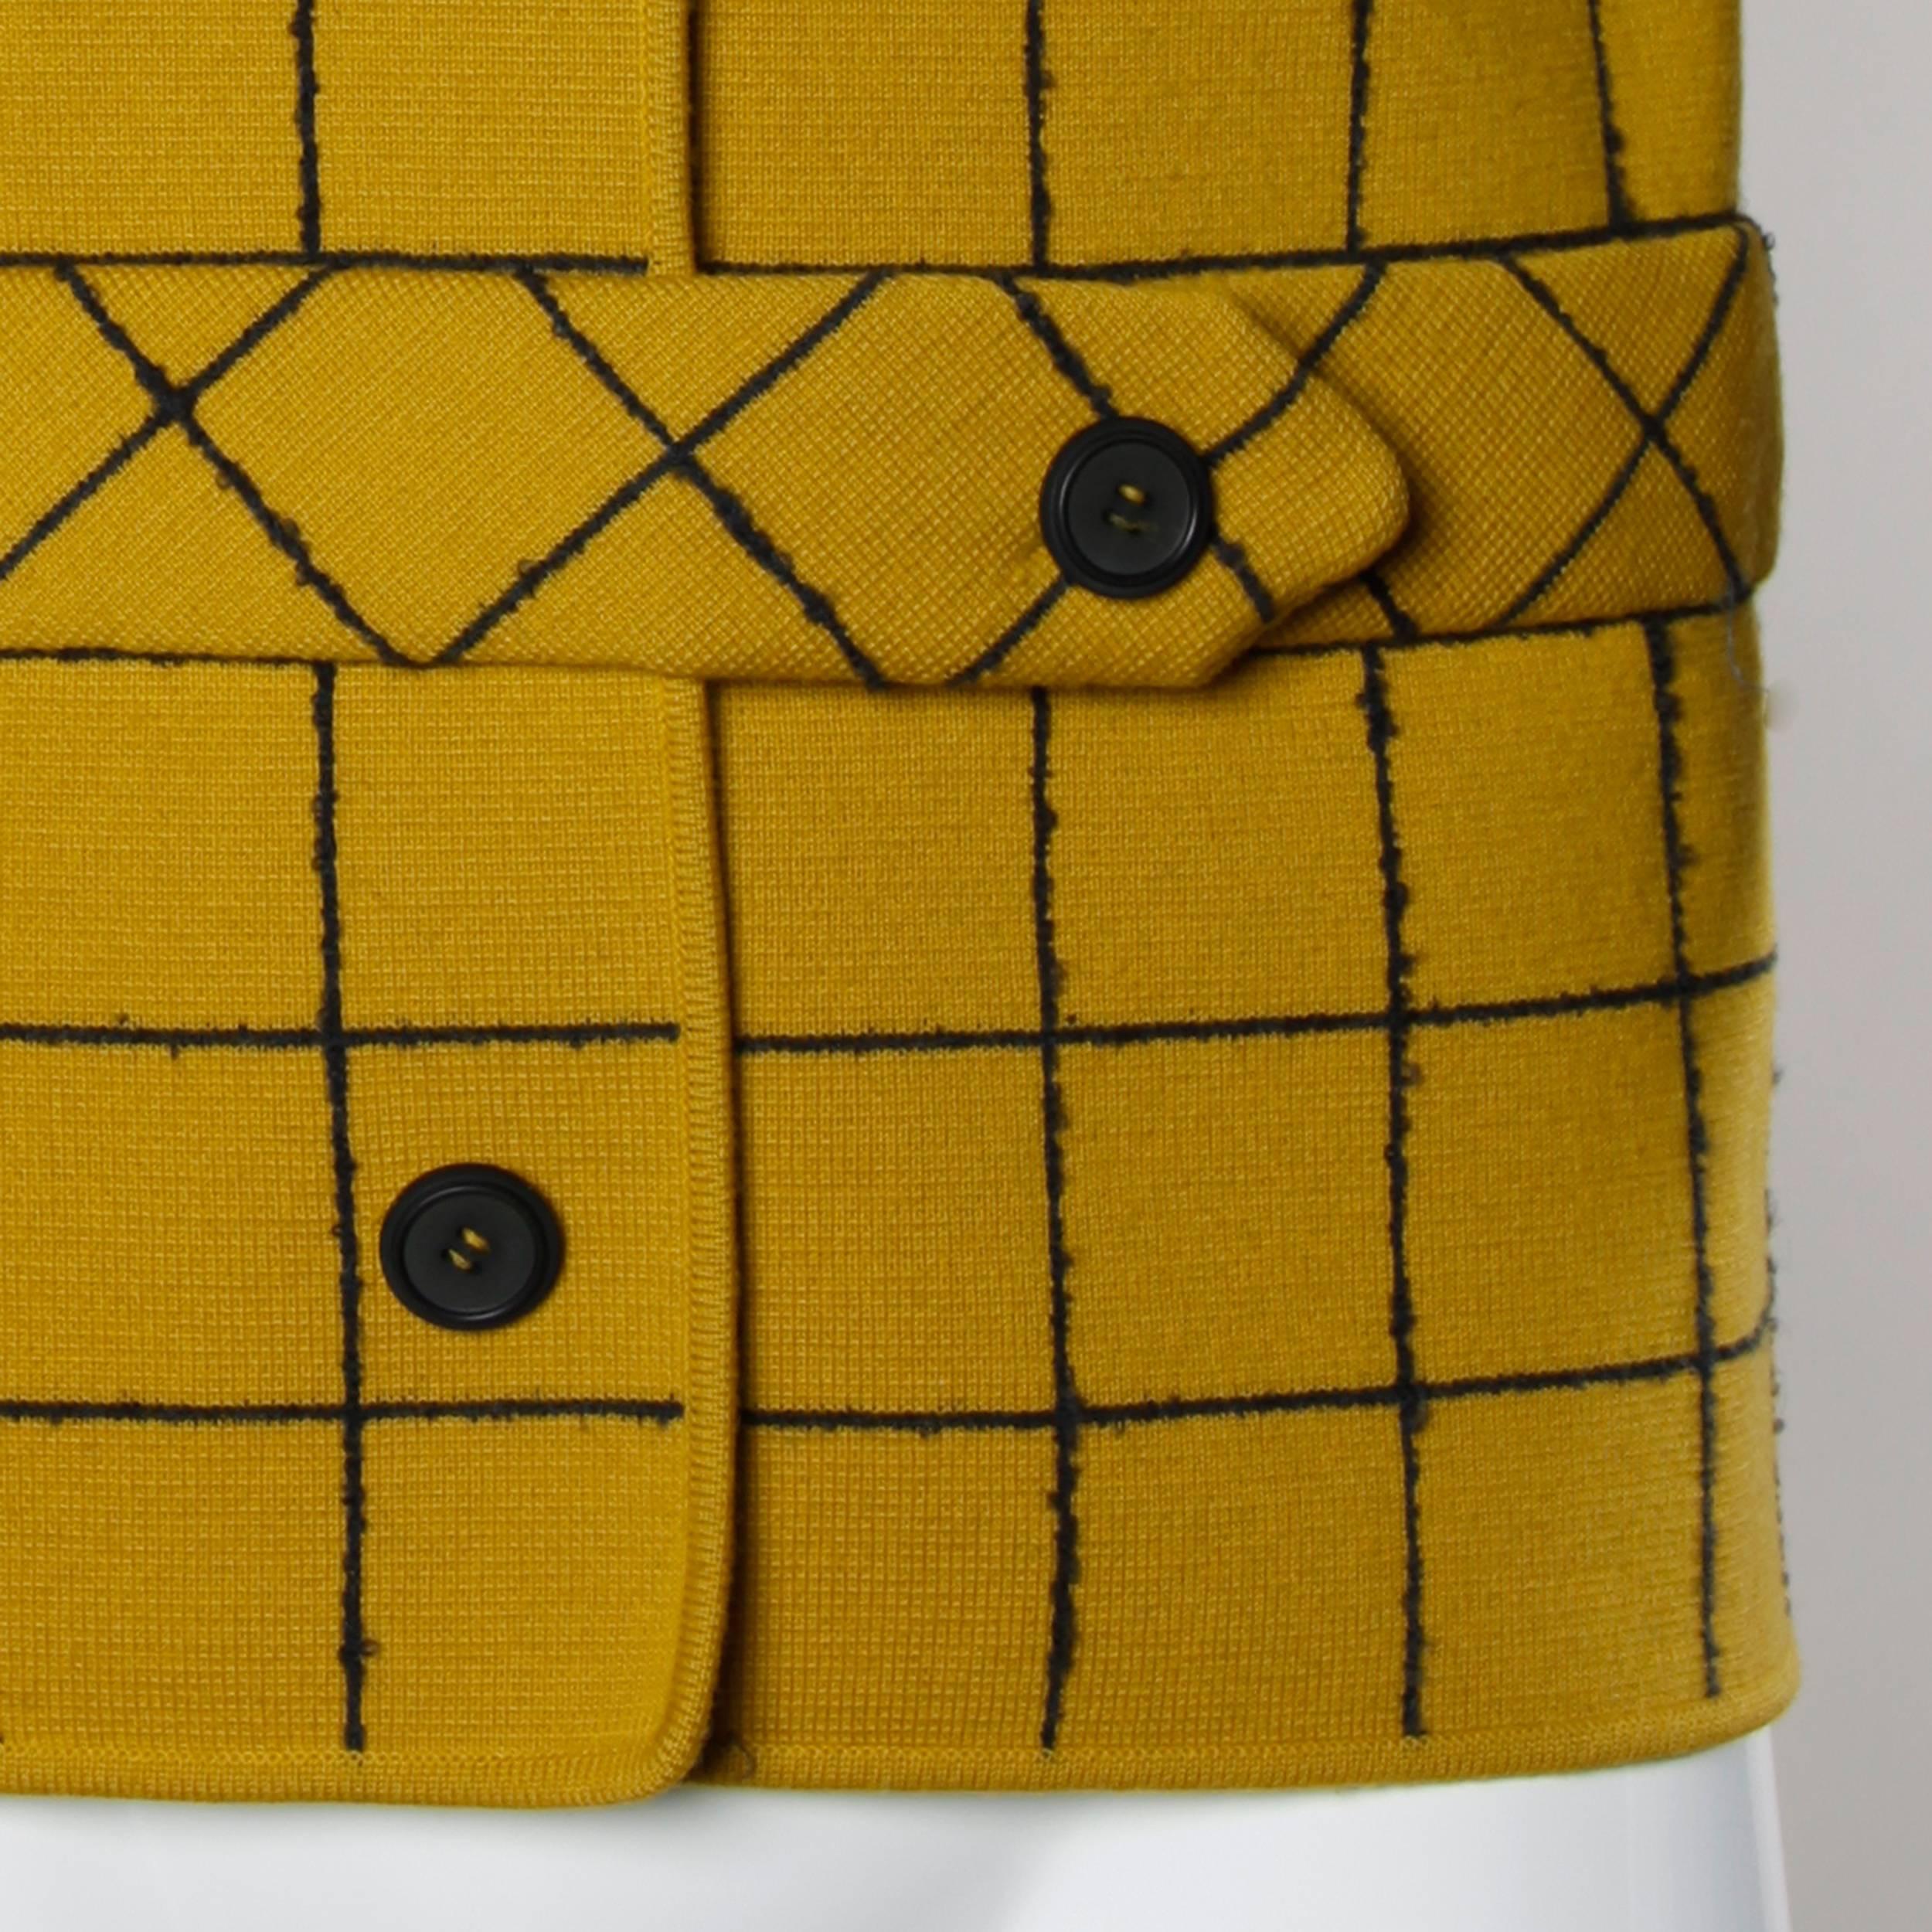 Mustard yellow Italian wool knit sweater jacket by Gino Paoli. Mod windowpane design with button up front.

Details:

Unlined
Front Pockets
Front Button Closure
Marked Size: US 8
Estimated Size: S-M
Color: Mustard 
Fabric: 100%